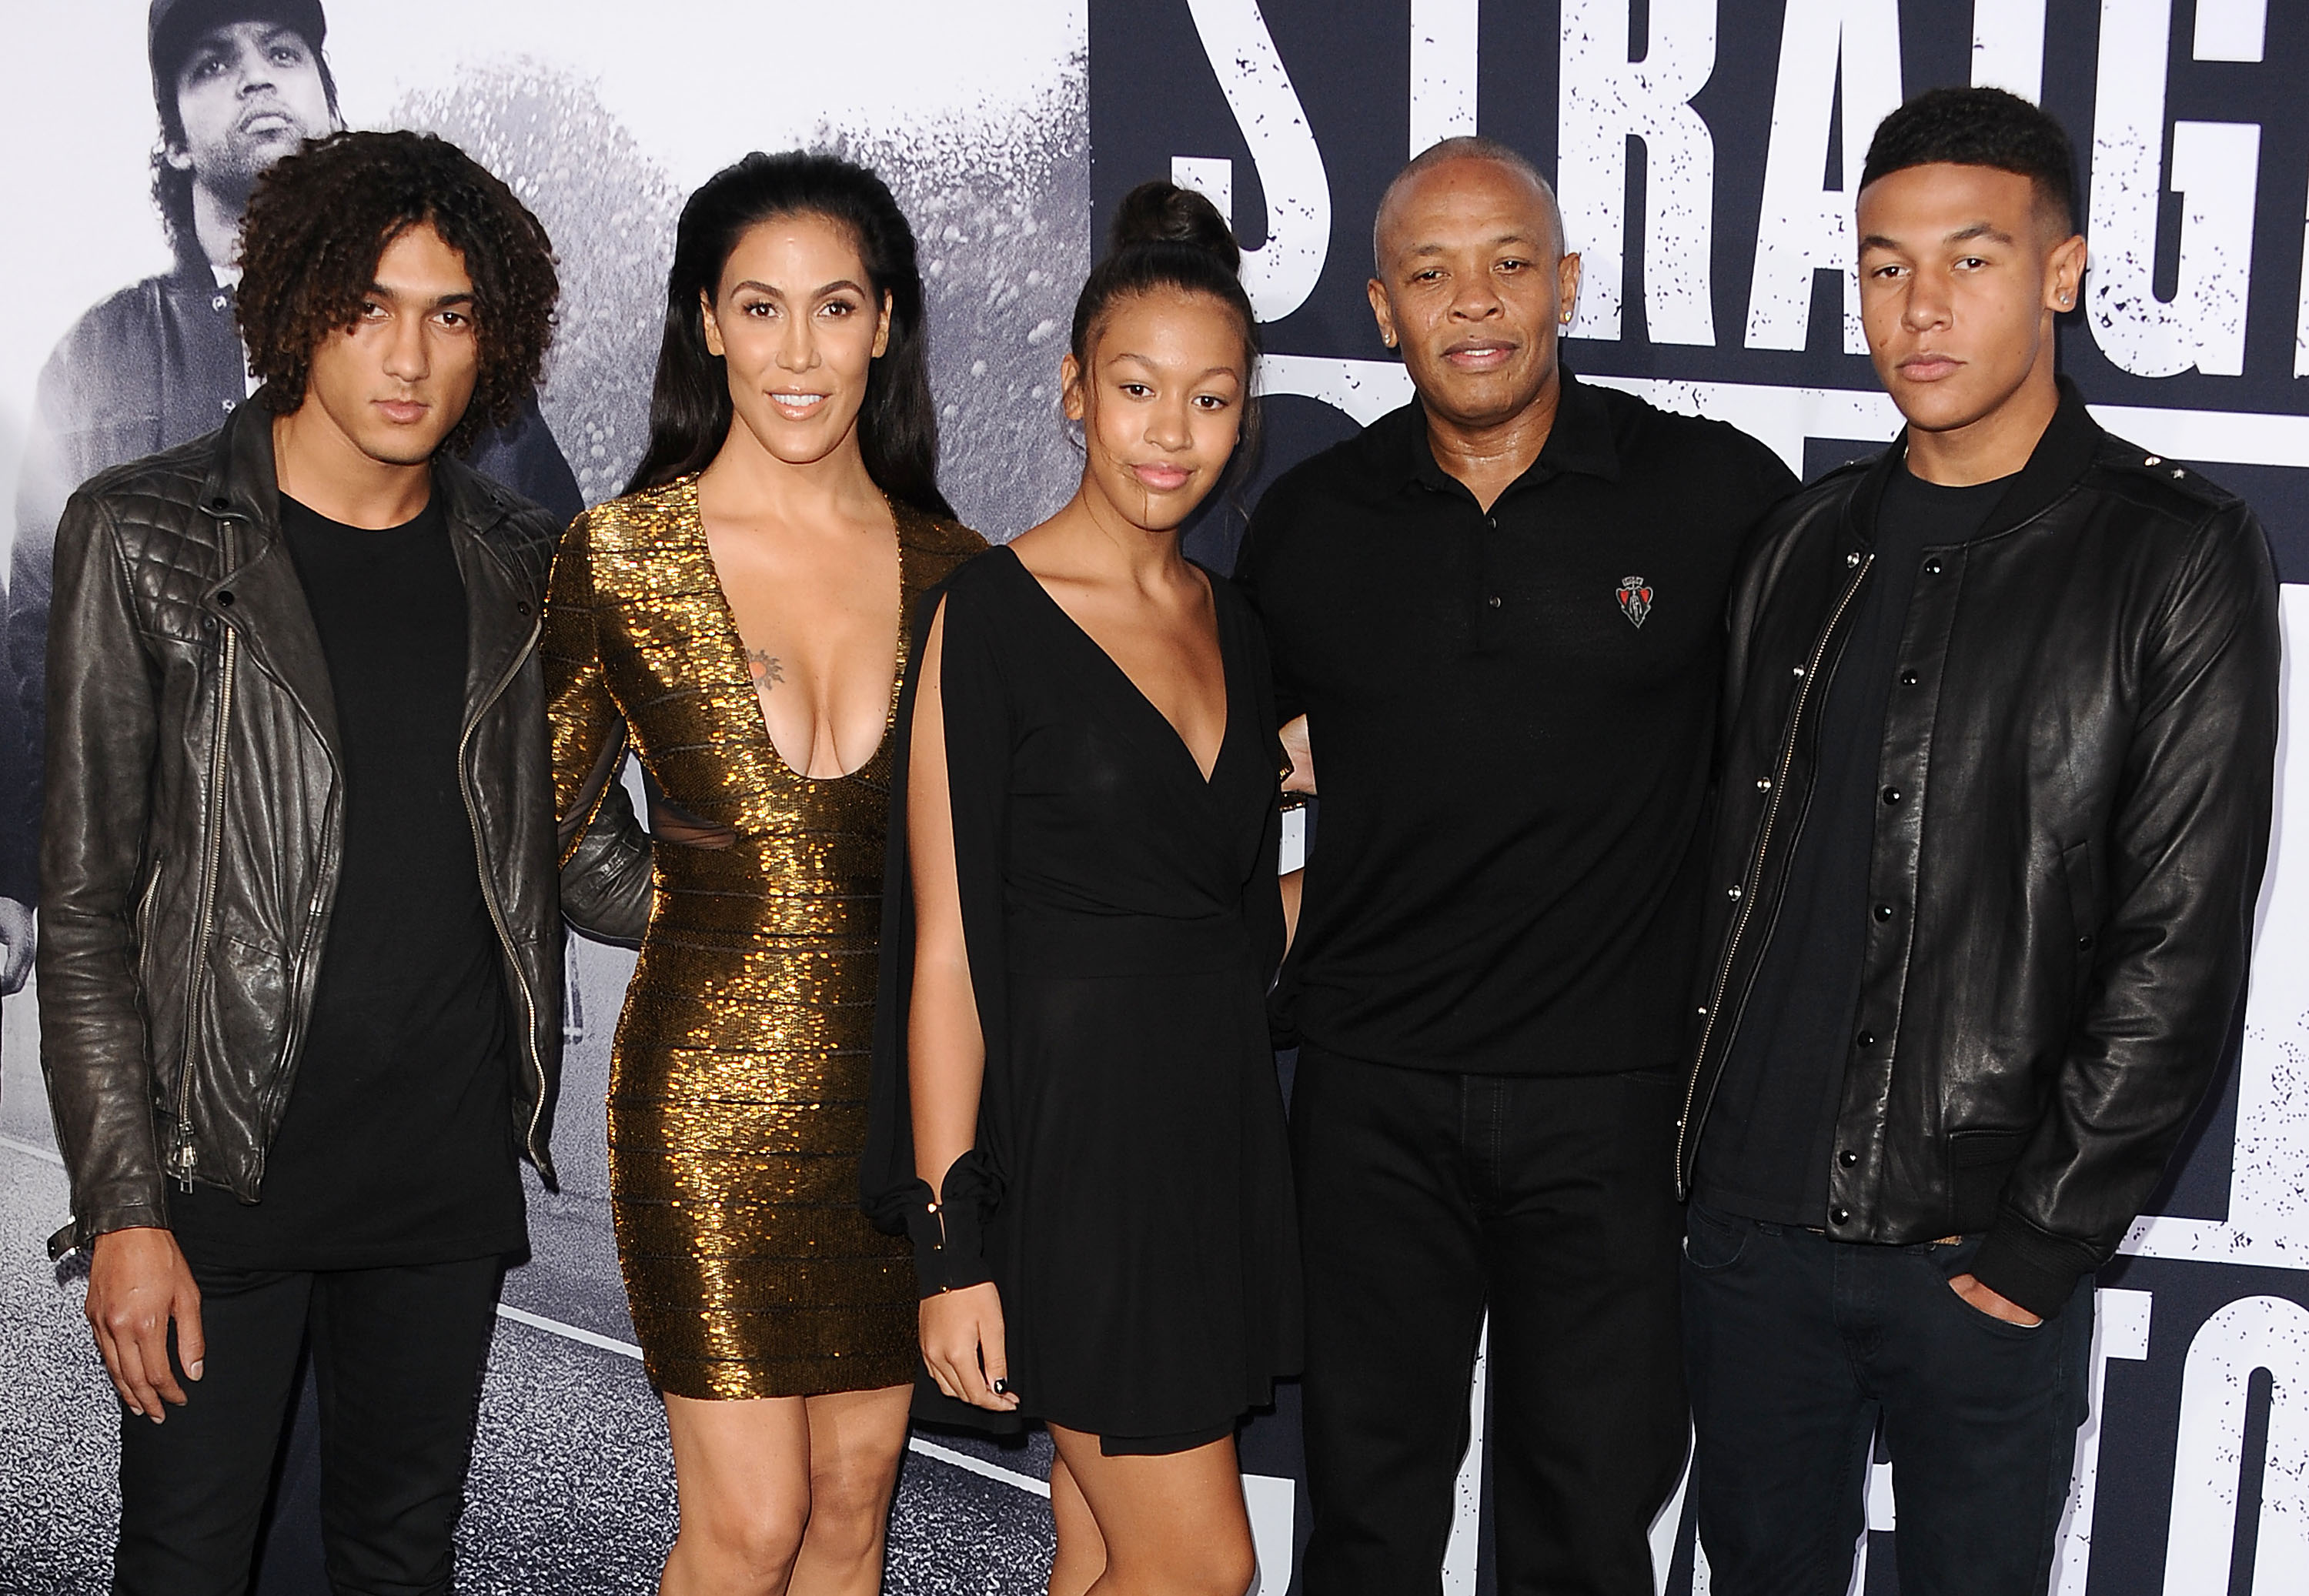 Dr. Dre, his wife Nicole Young, and their children at the premiere of "Straight Outta Compton" on August 10, 2015, in Los Angeles, California | Source: Getty Images